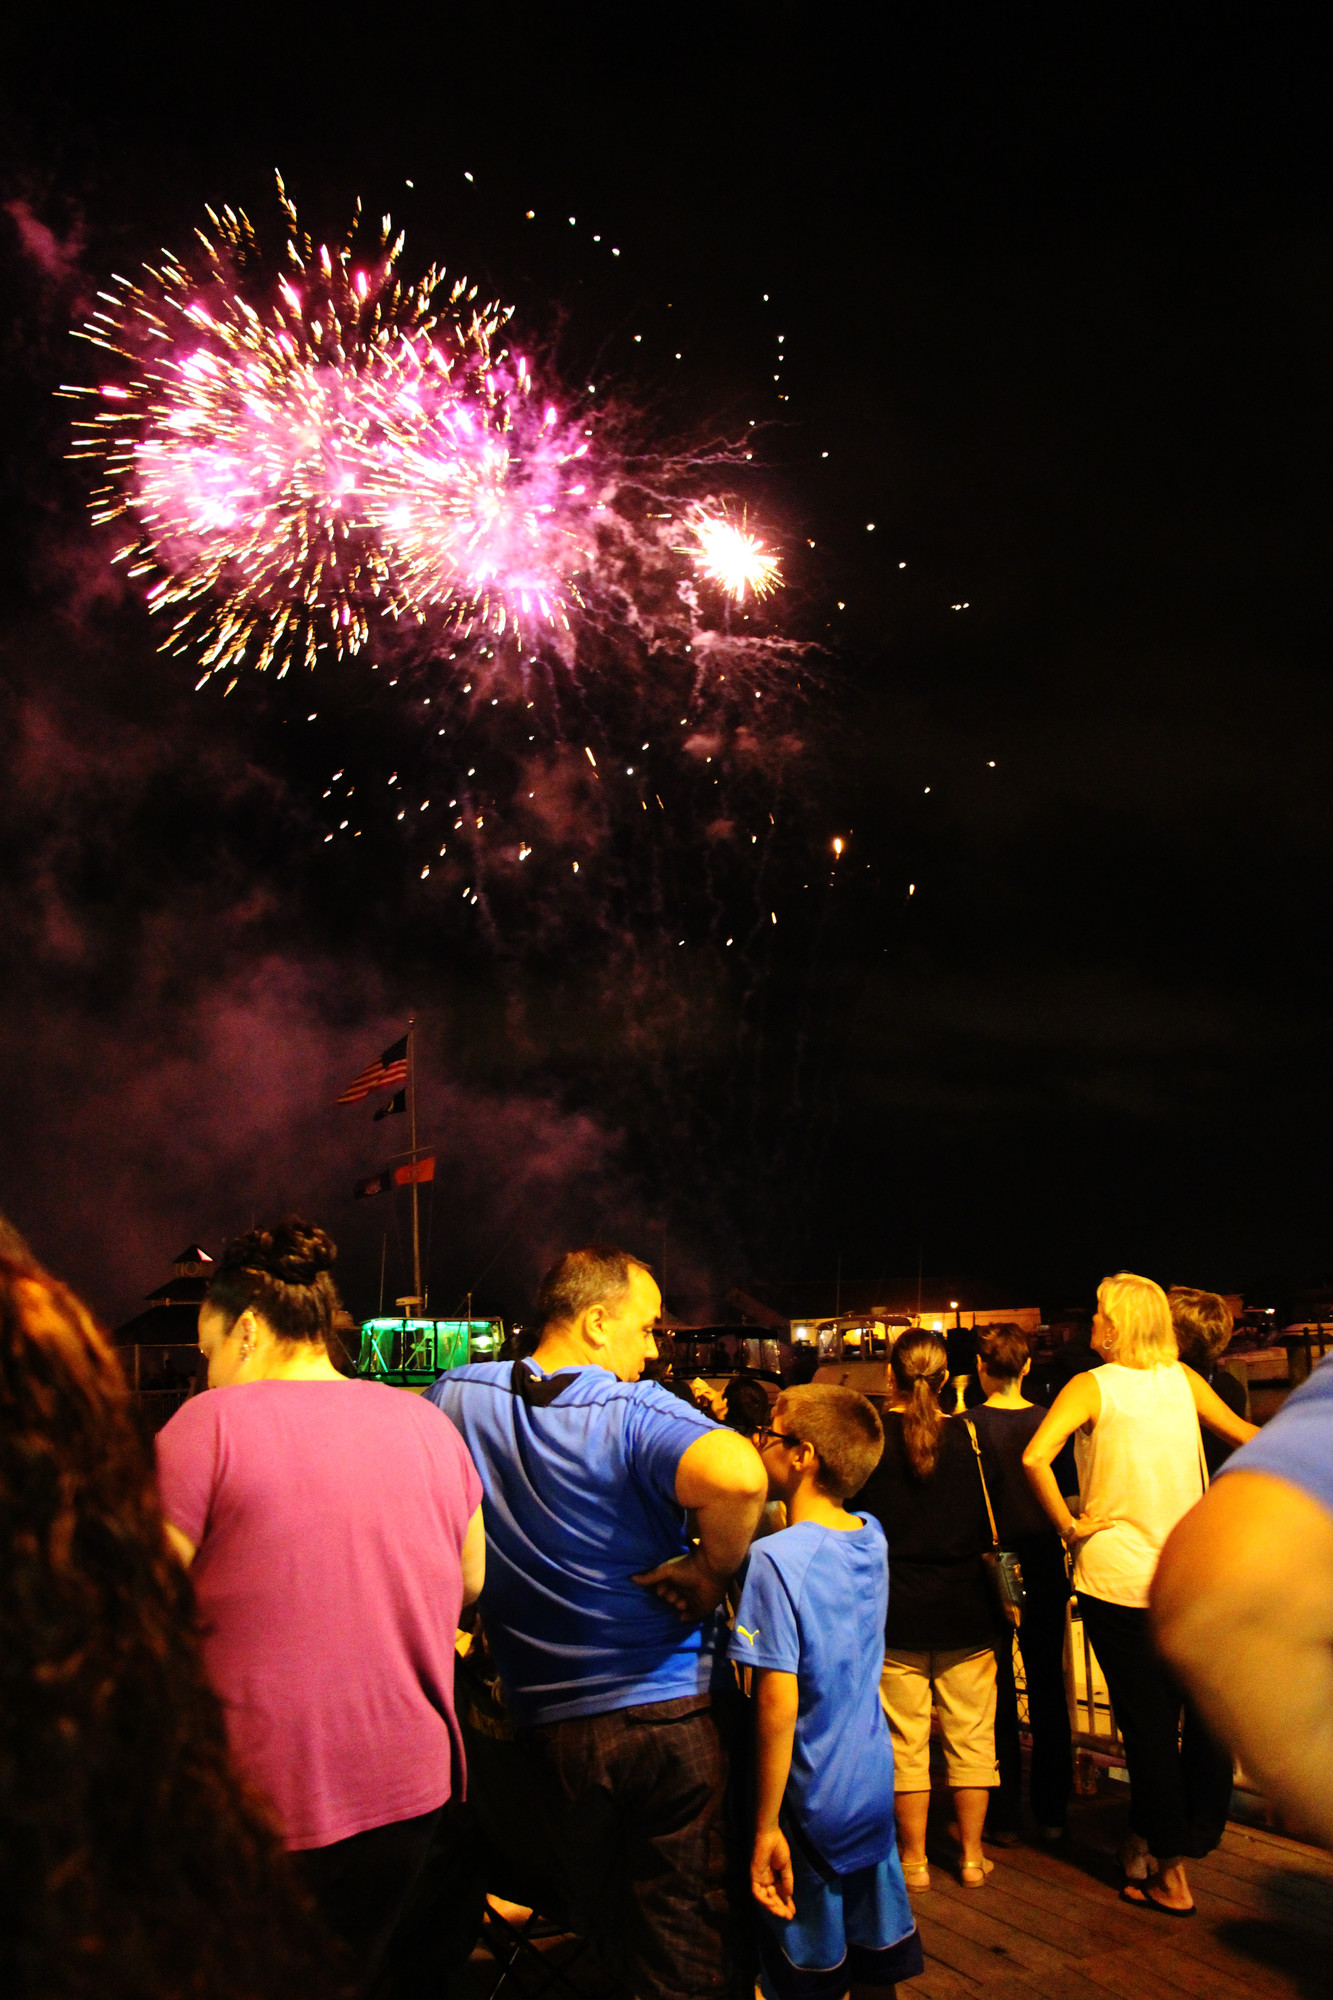 The crowds gathered at the shoreline of the canal to see the colorful fireworks.